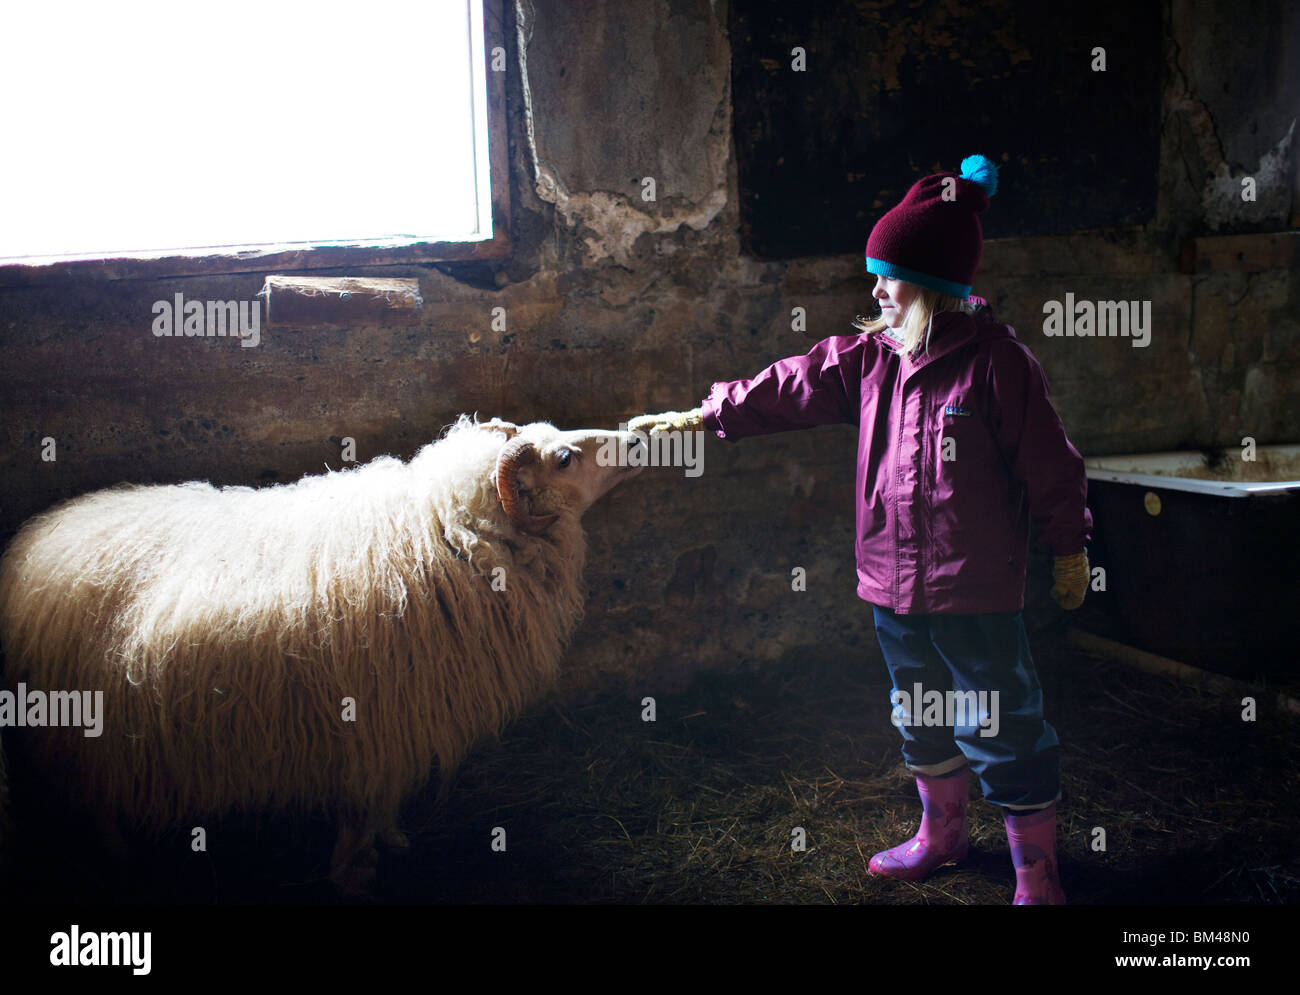 A young girl pets a sheep in Iceland Stock Photo